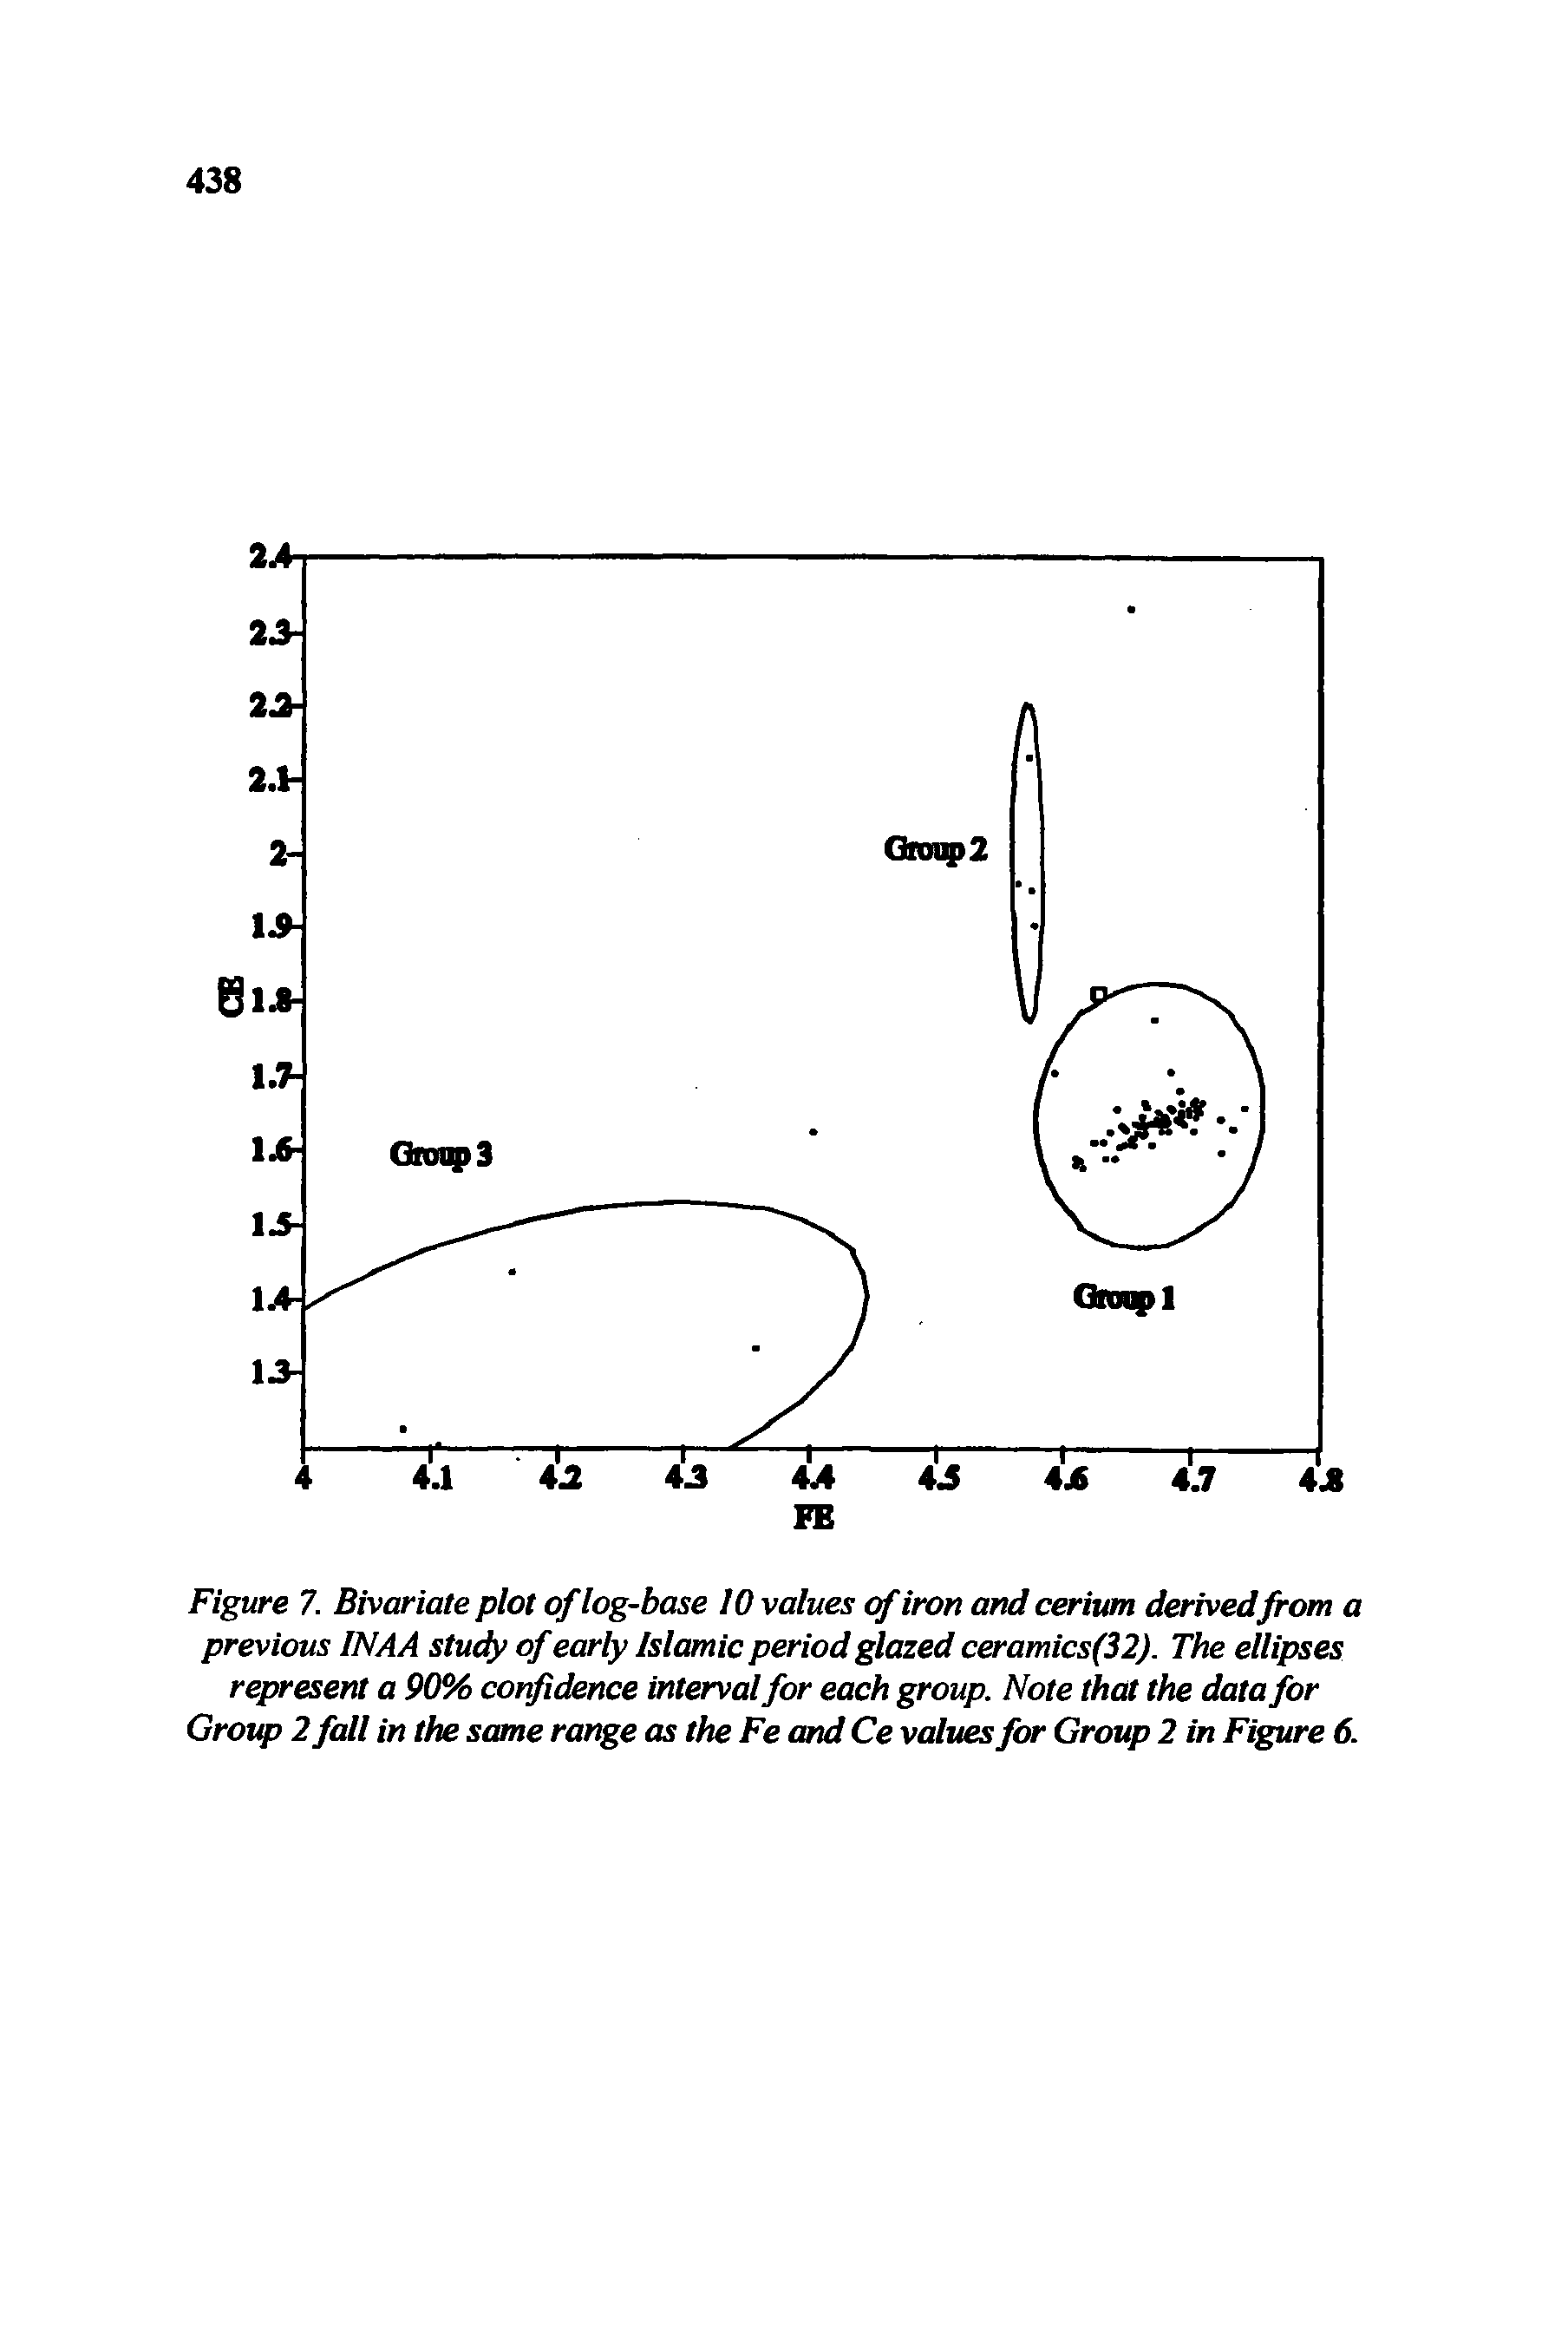 Figure 7. Bivariate plot of log-base 10 values of iron and cerium derivedfrom a previous INAA study of early Islamic period glazed ceramics(32). The ellipses represent a 90% confidence interval for each group. Note that the data for Group 2 fall in the same range as the Fe and Ce values for Group 2 in Figure 6.